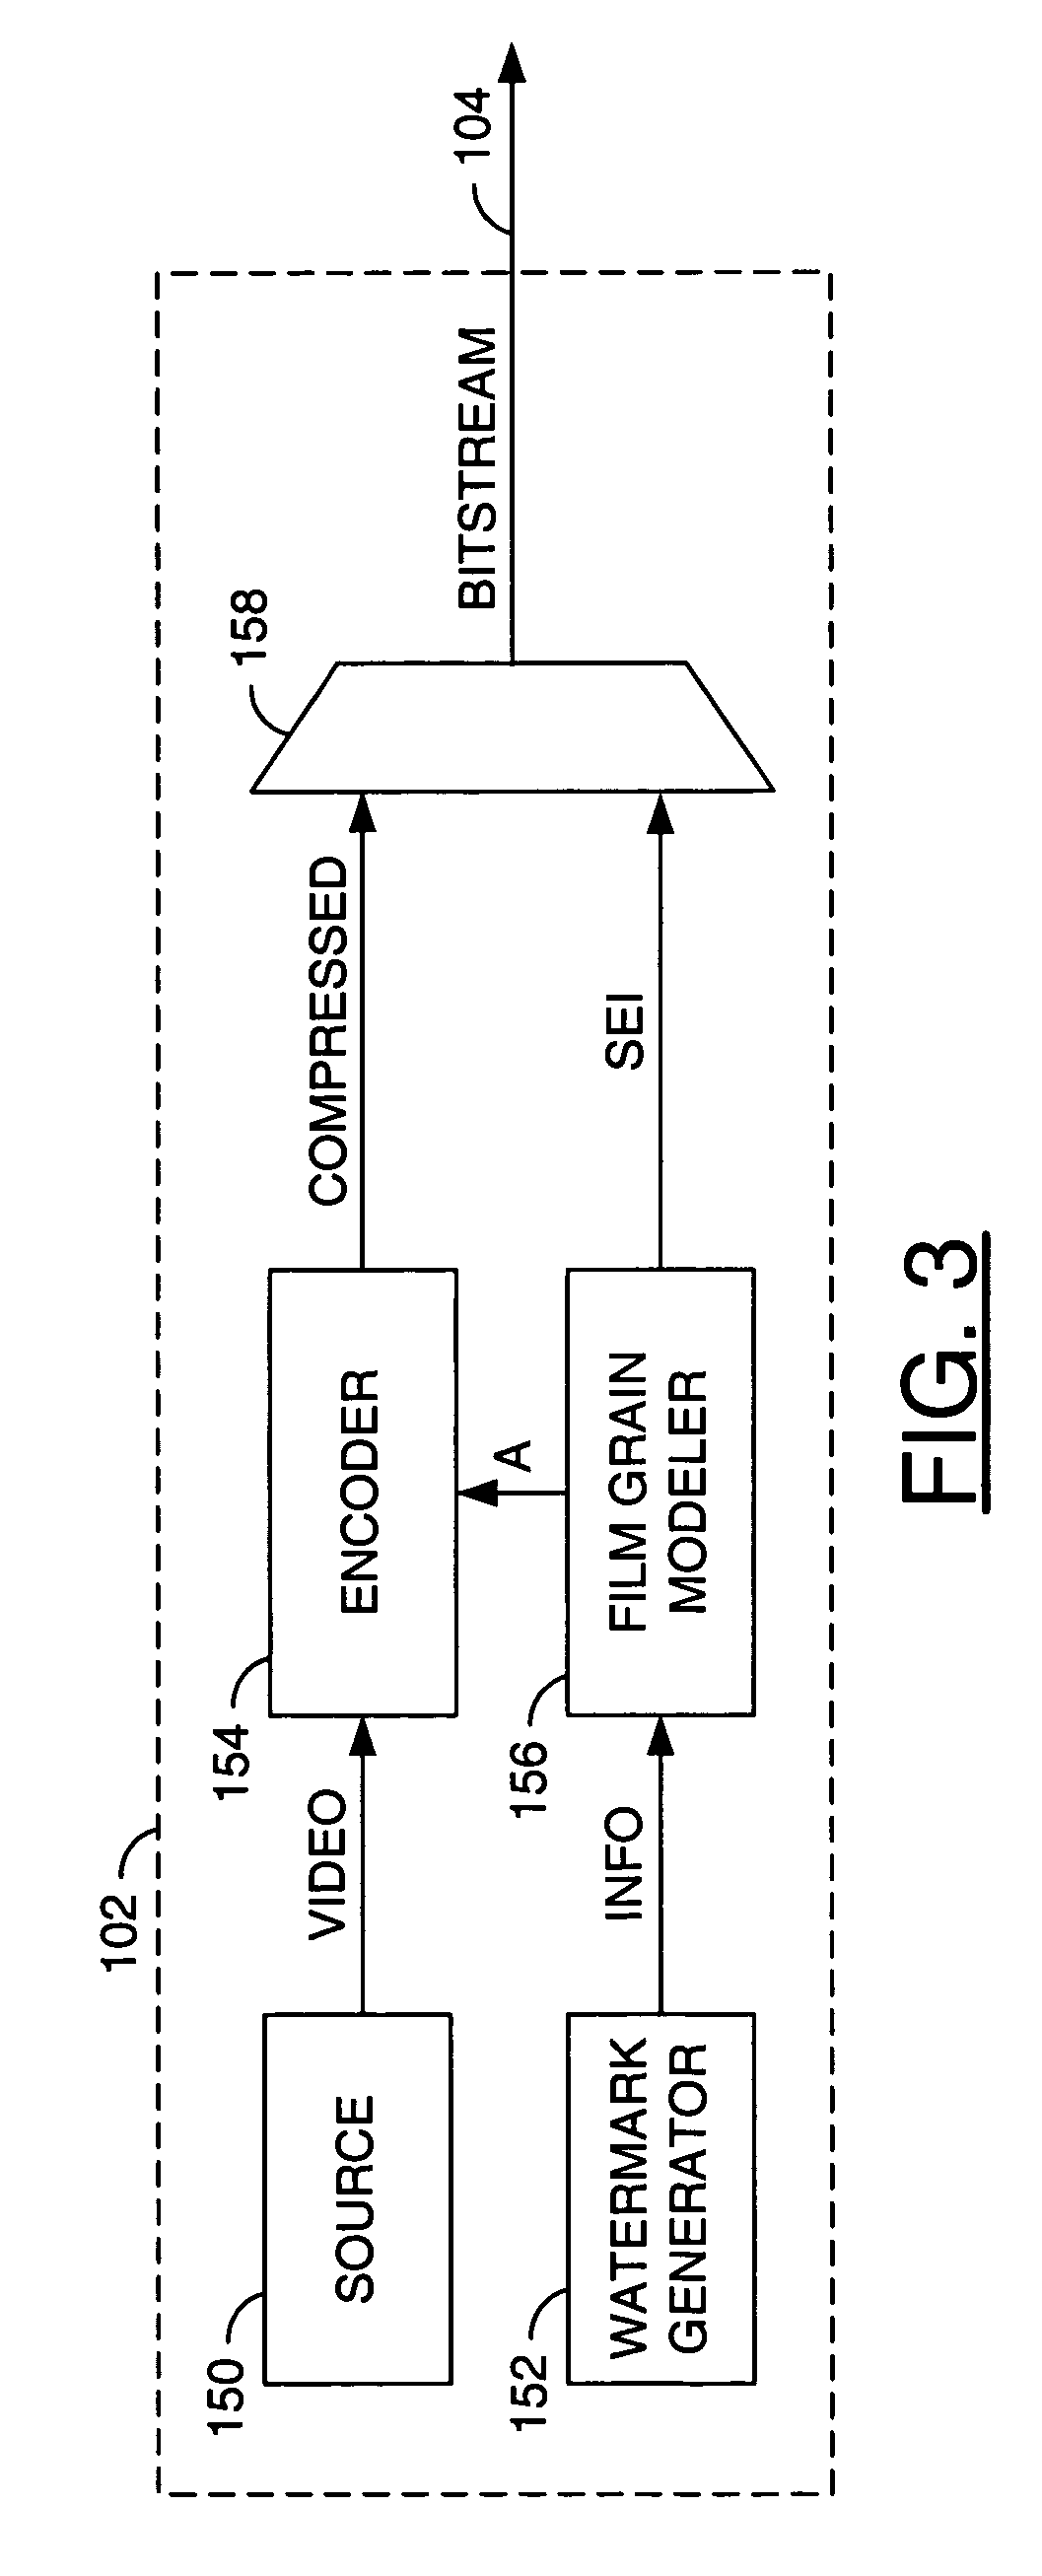 Method and/or apparatus for video watermarking and steganography using simulated film grain